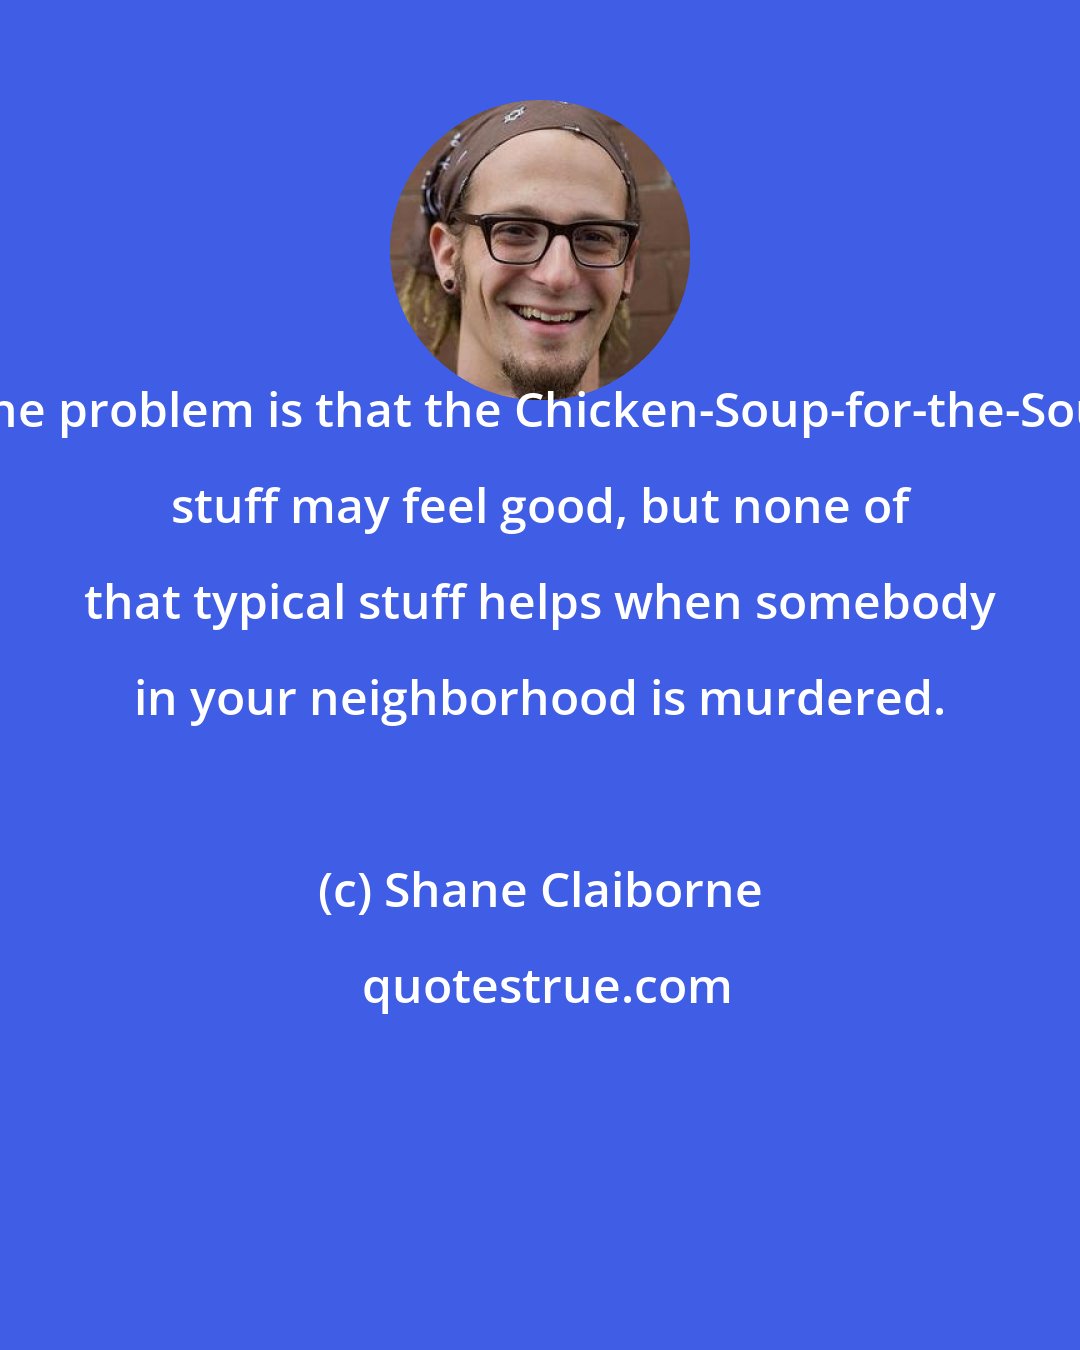 Shane Claiborne: The problem is that the Chicken-Soup-for-the-Soul stuff may feel good, but none of that typical stuff helps when somebody in your neighborhood is murdered.